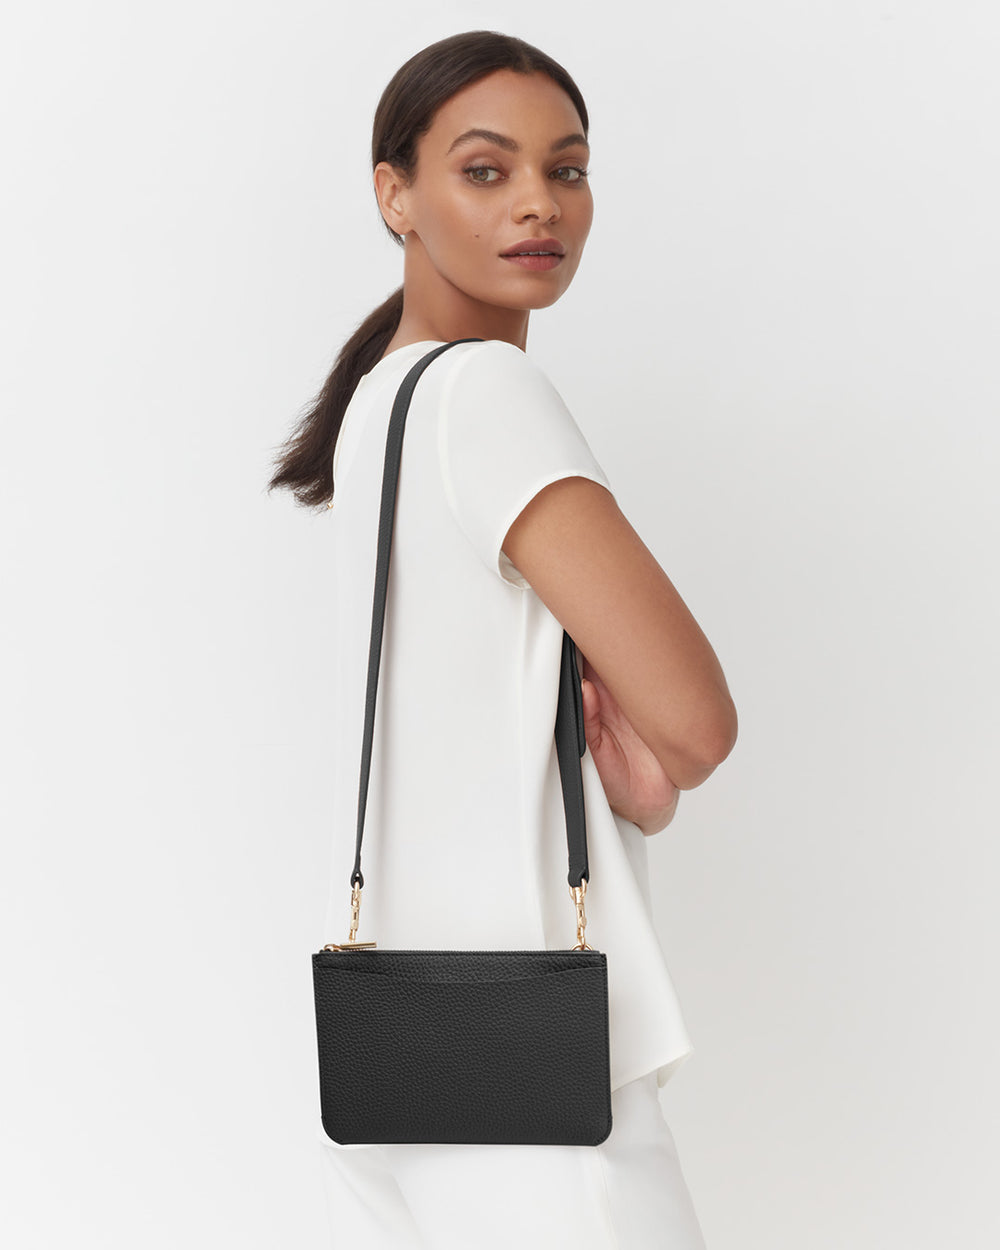 Woman looking over shoulder with purse on strap.